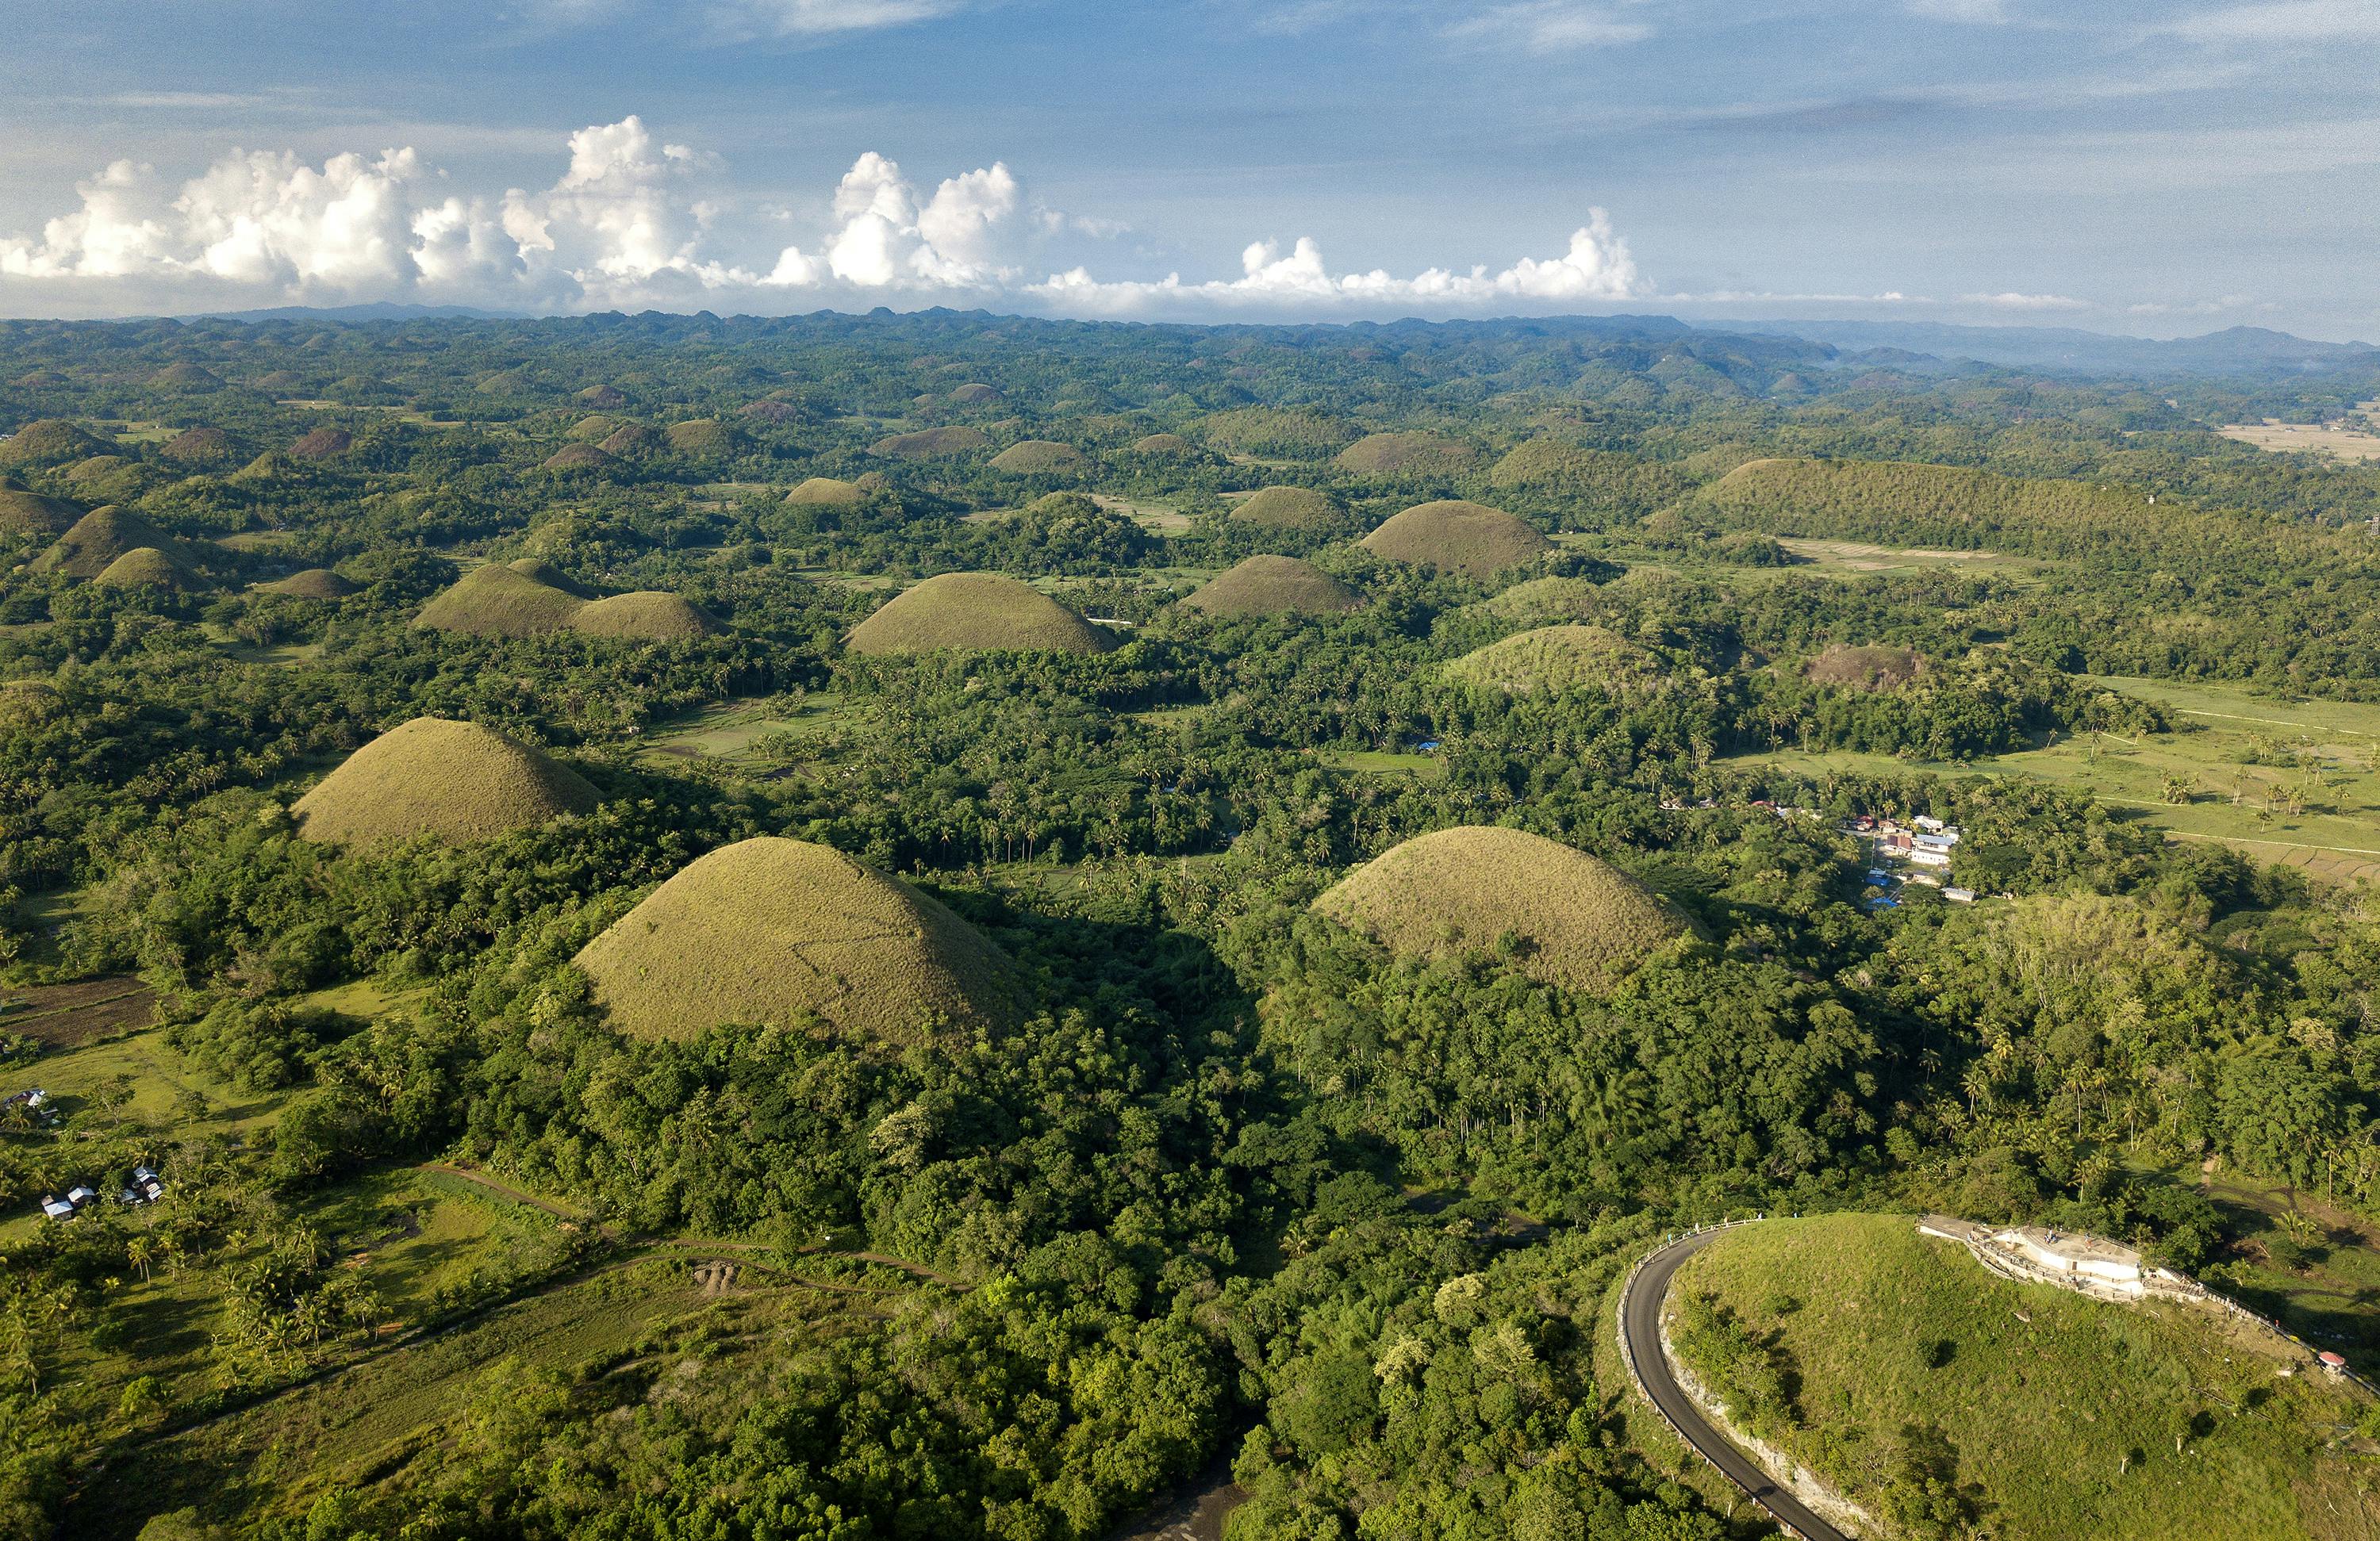 Stunning aerial view of the world-famous Chocolate Hills in Bohol